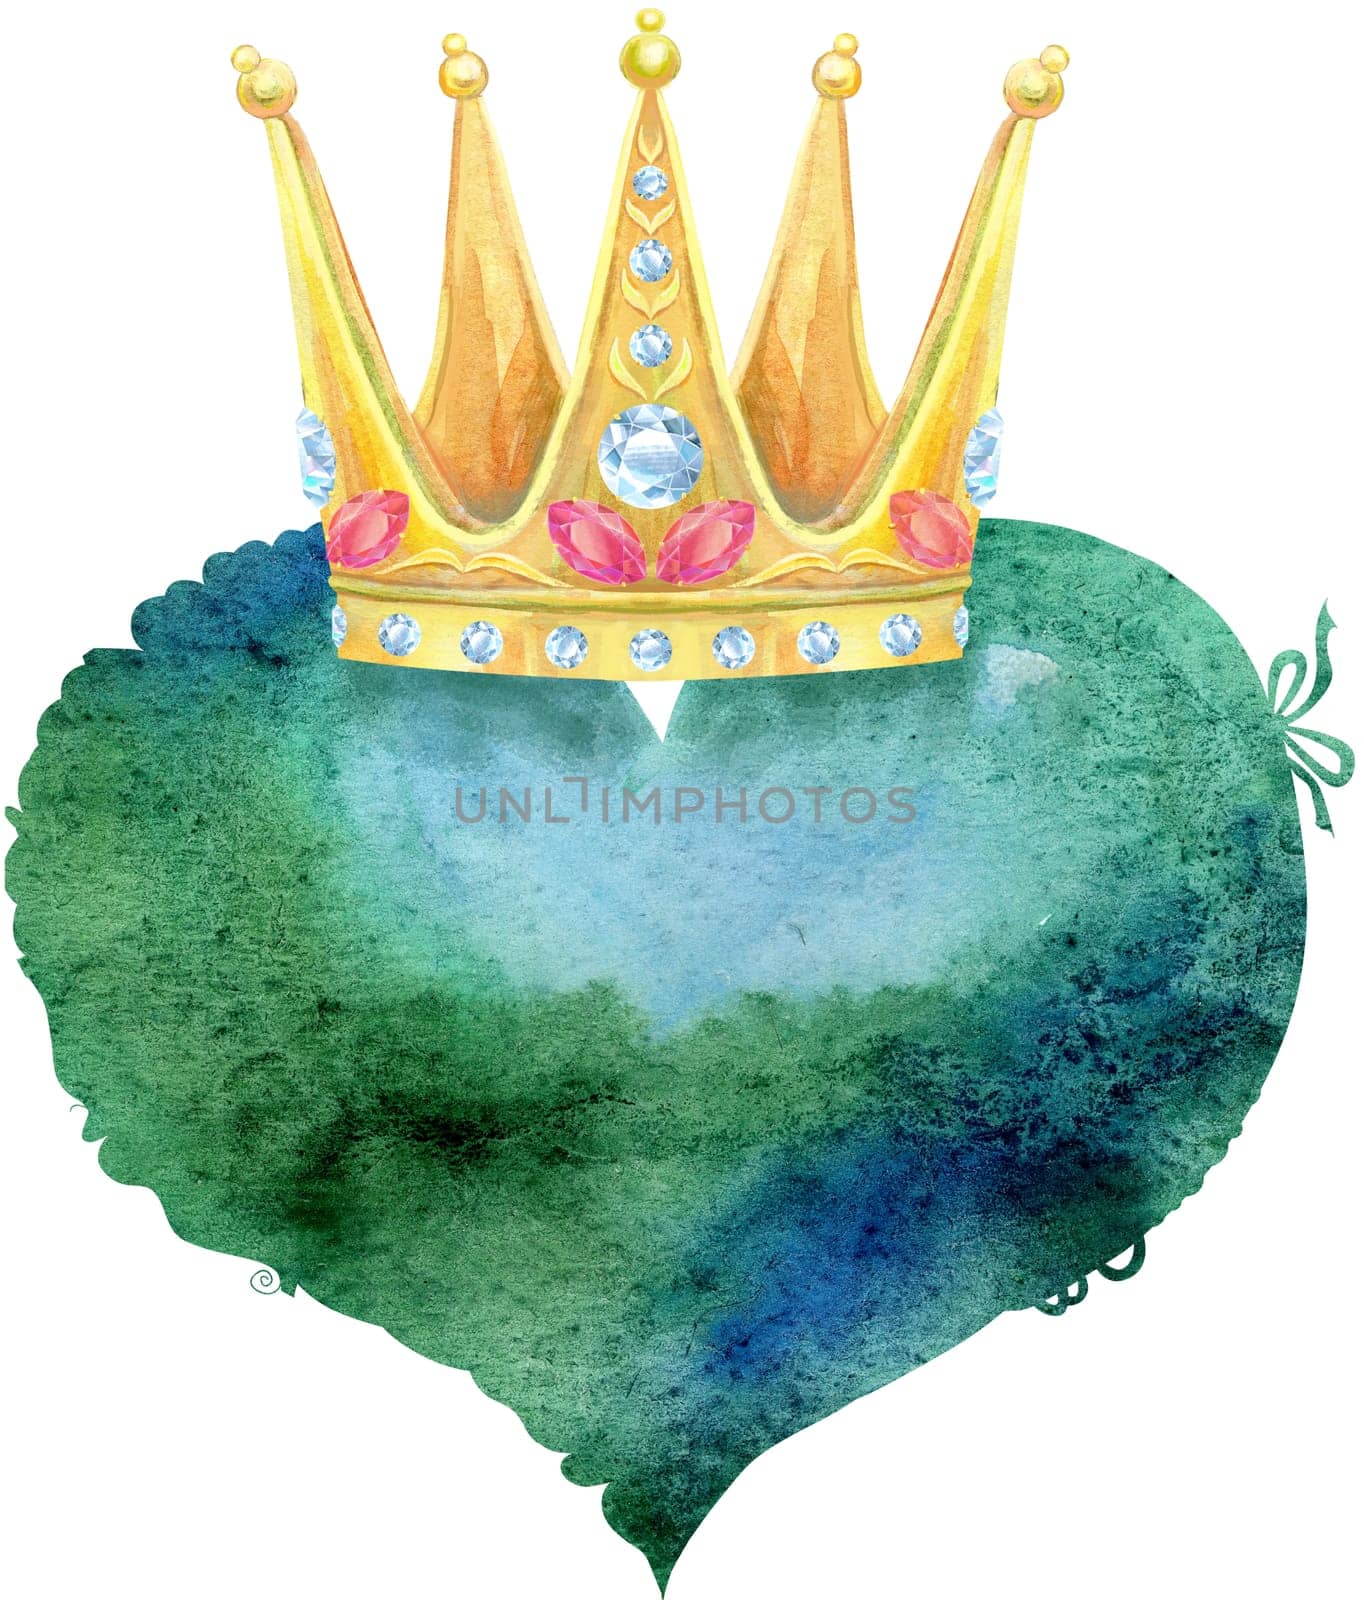 Watercolor dark green heart with golden crown by NataOmsk